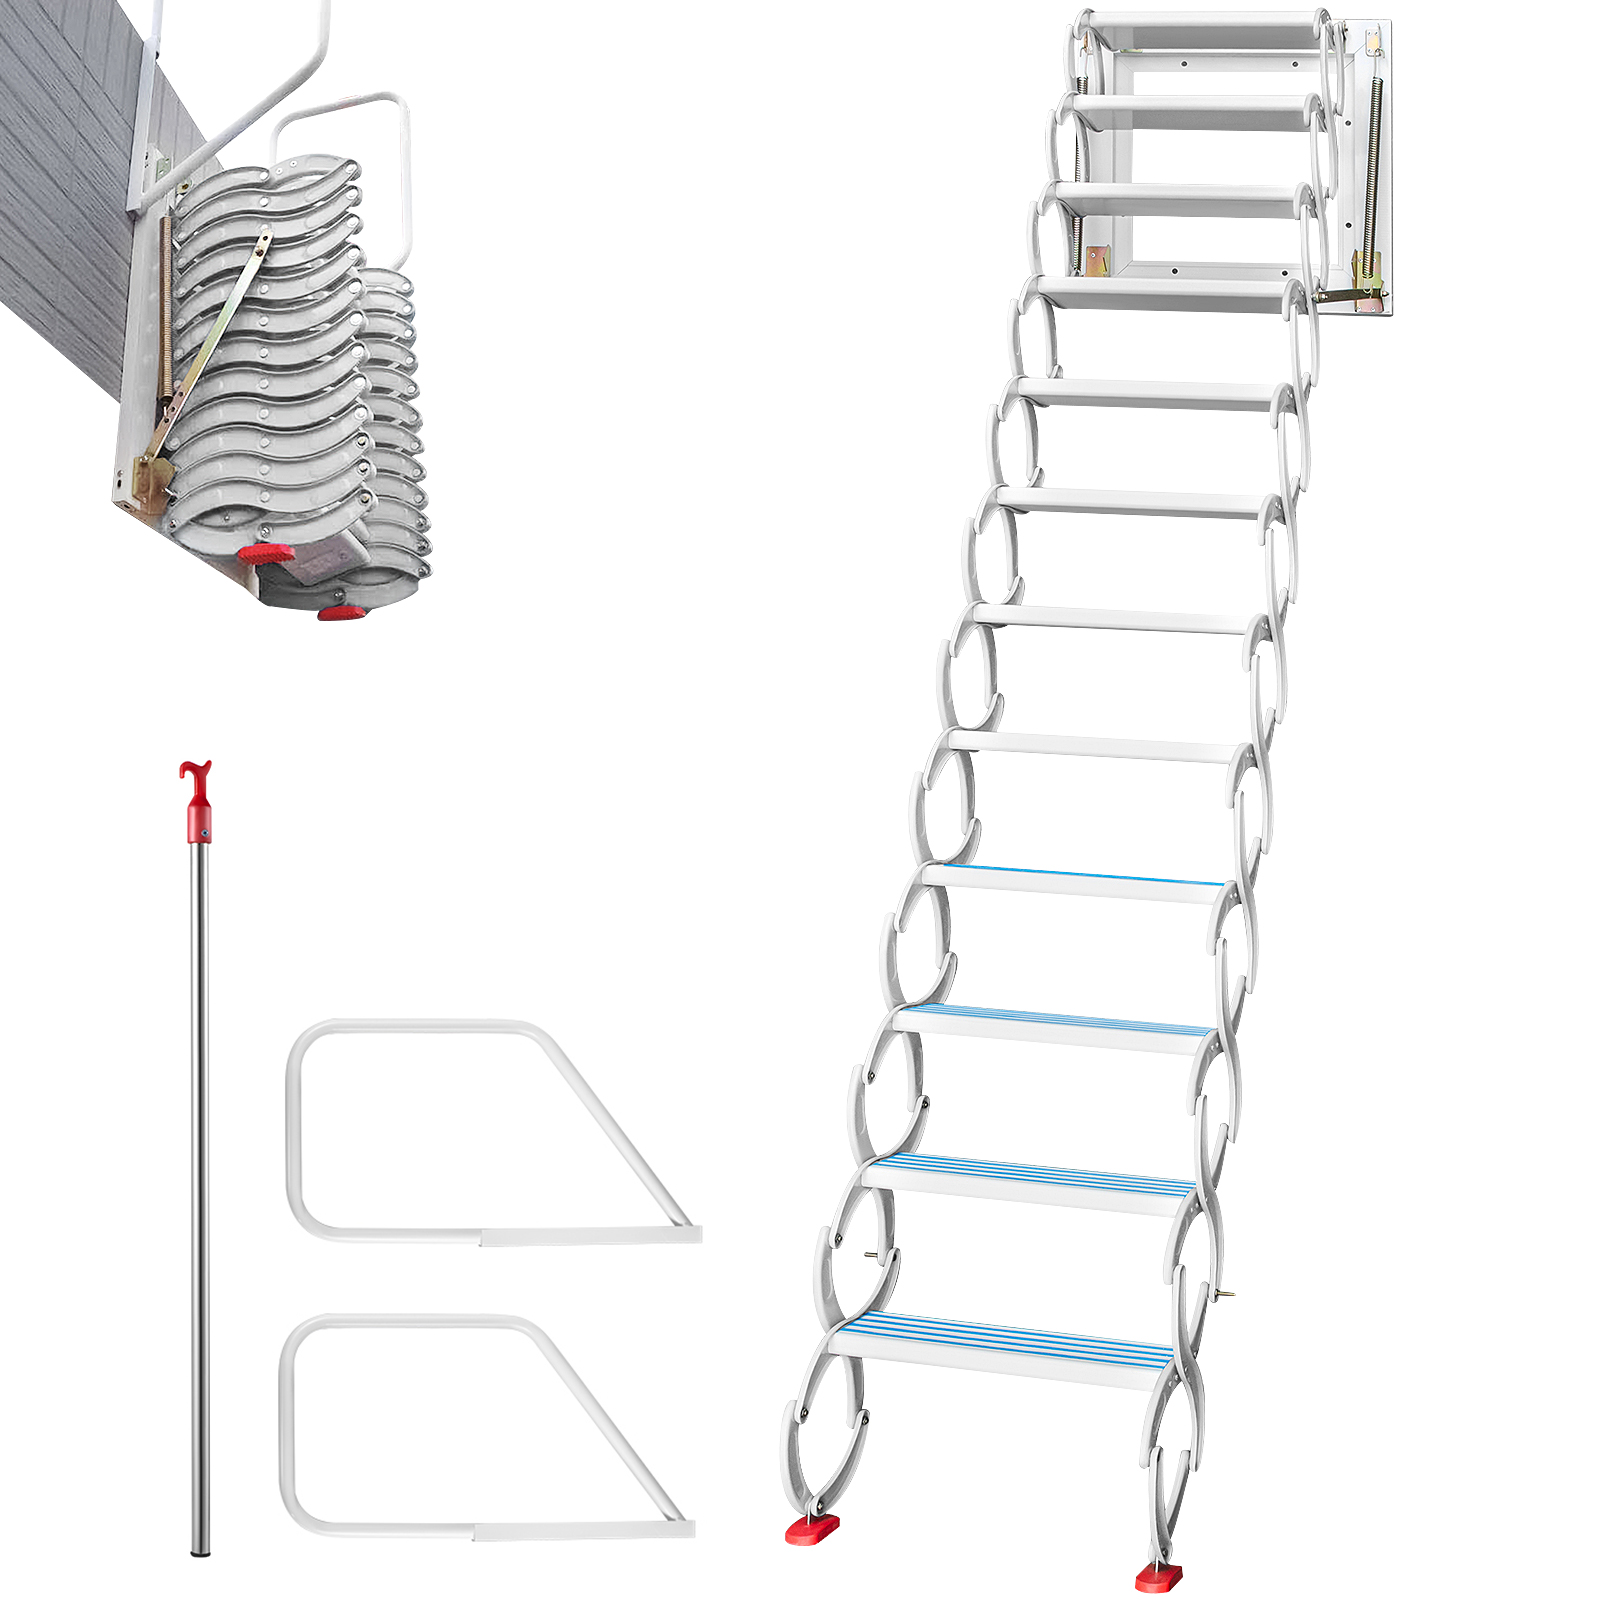 VEVORbrand Attic Steps Pull Down 12 Steps Attic Stairs Alloy Attic Access Ladder, White Pulldown, Wall-mounted Folding Stairs For Attic, Retractable Attic Ladder With Armrests, 9.8 Feet Height - image 1 of 9